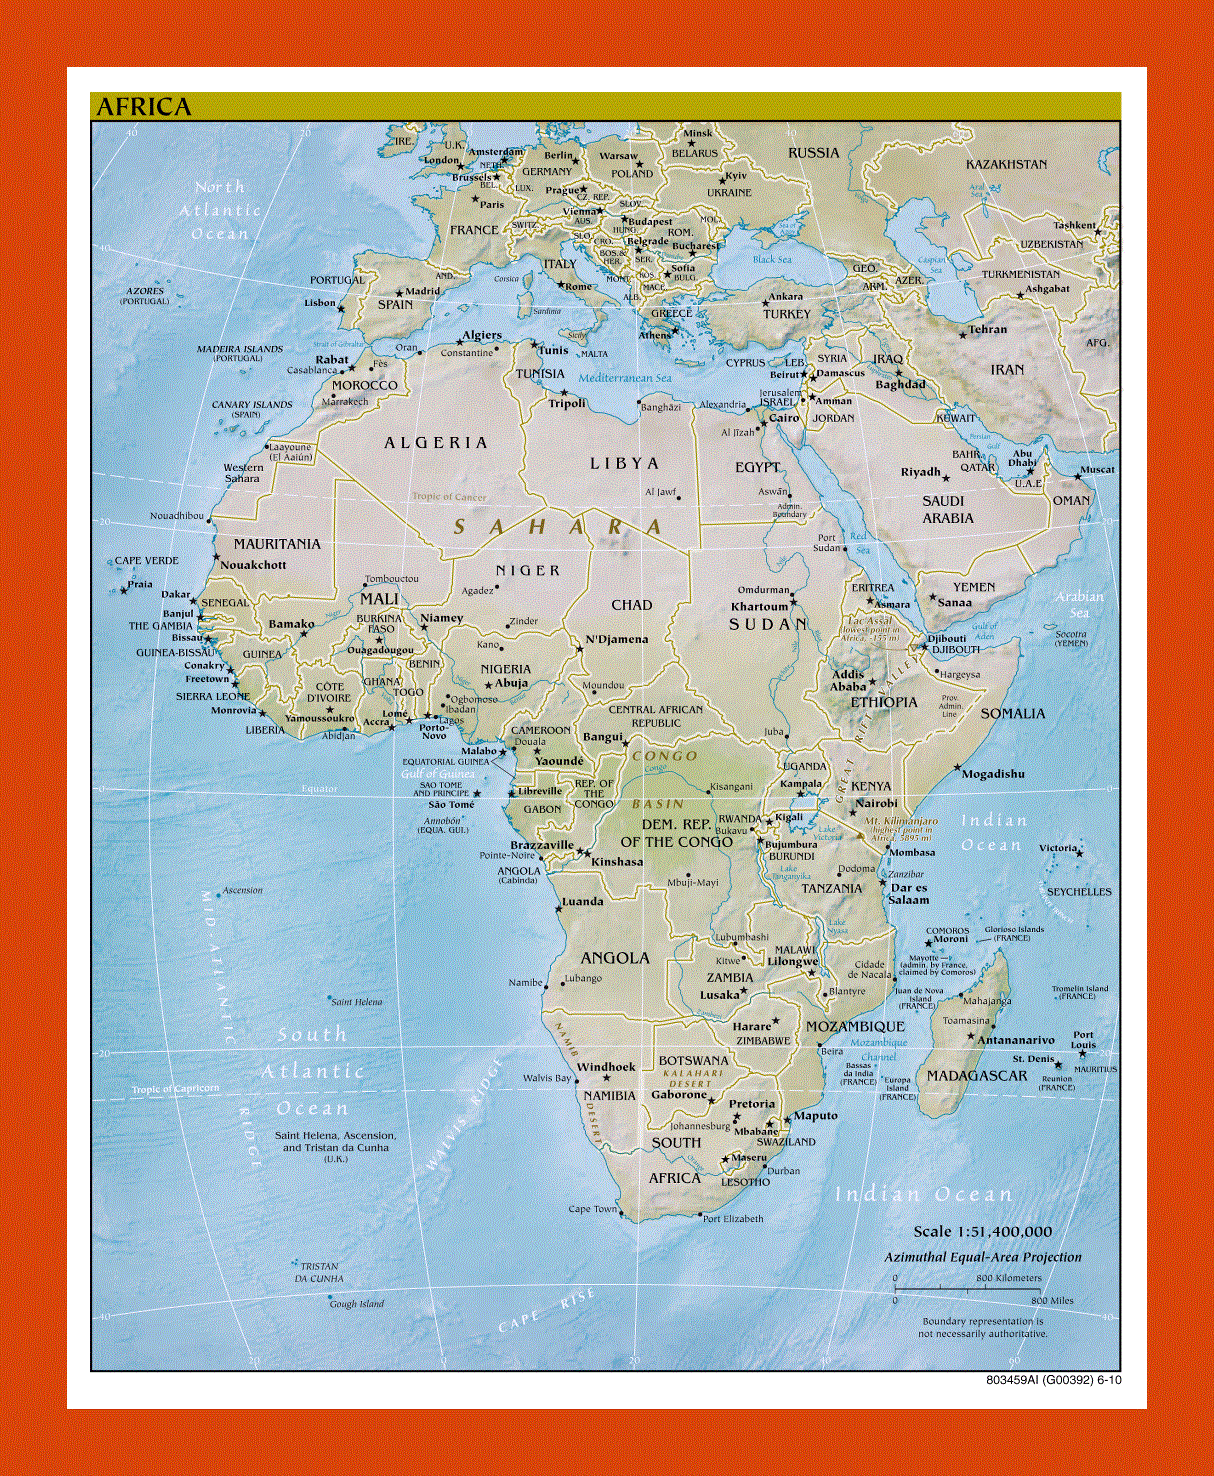 Political map of Africa - 2010